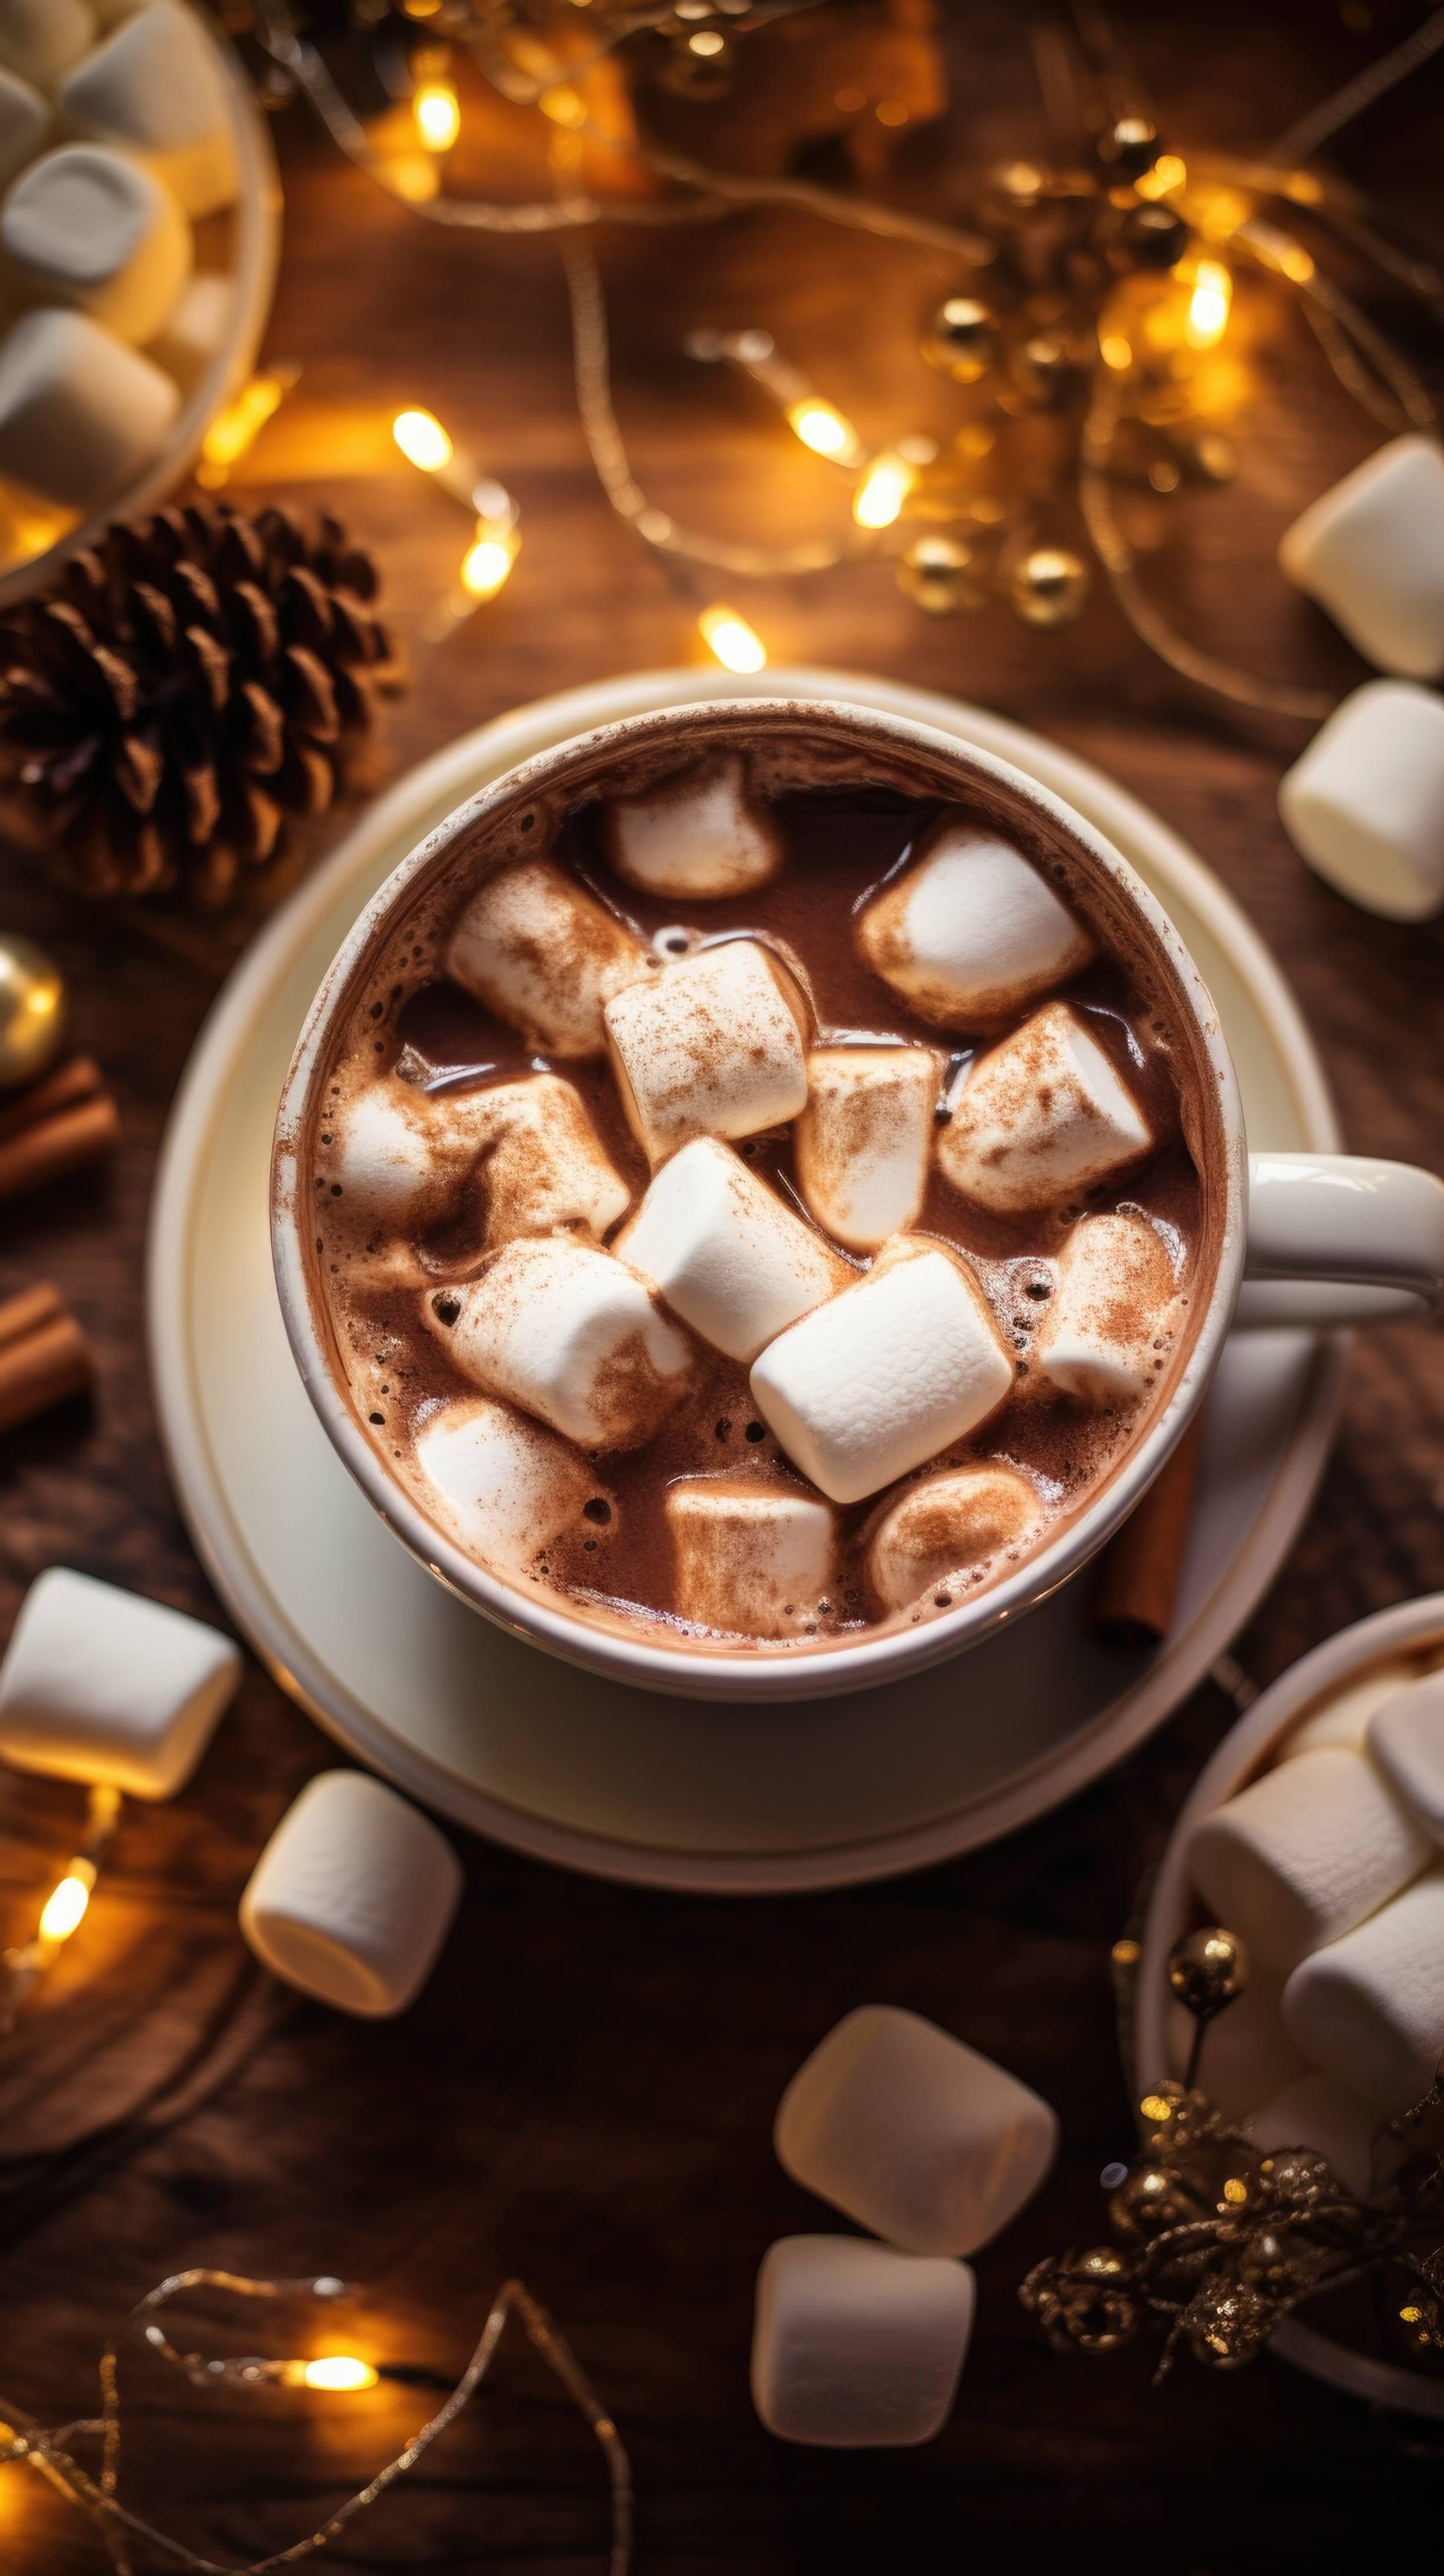 A Steaming Mug Of Hot Chocolate Topped With Fluffy Marshmallows